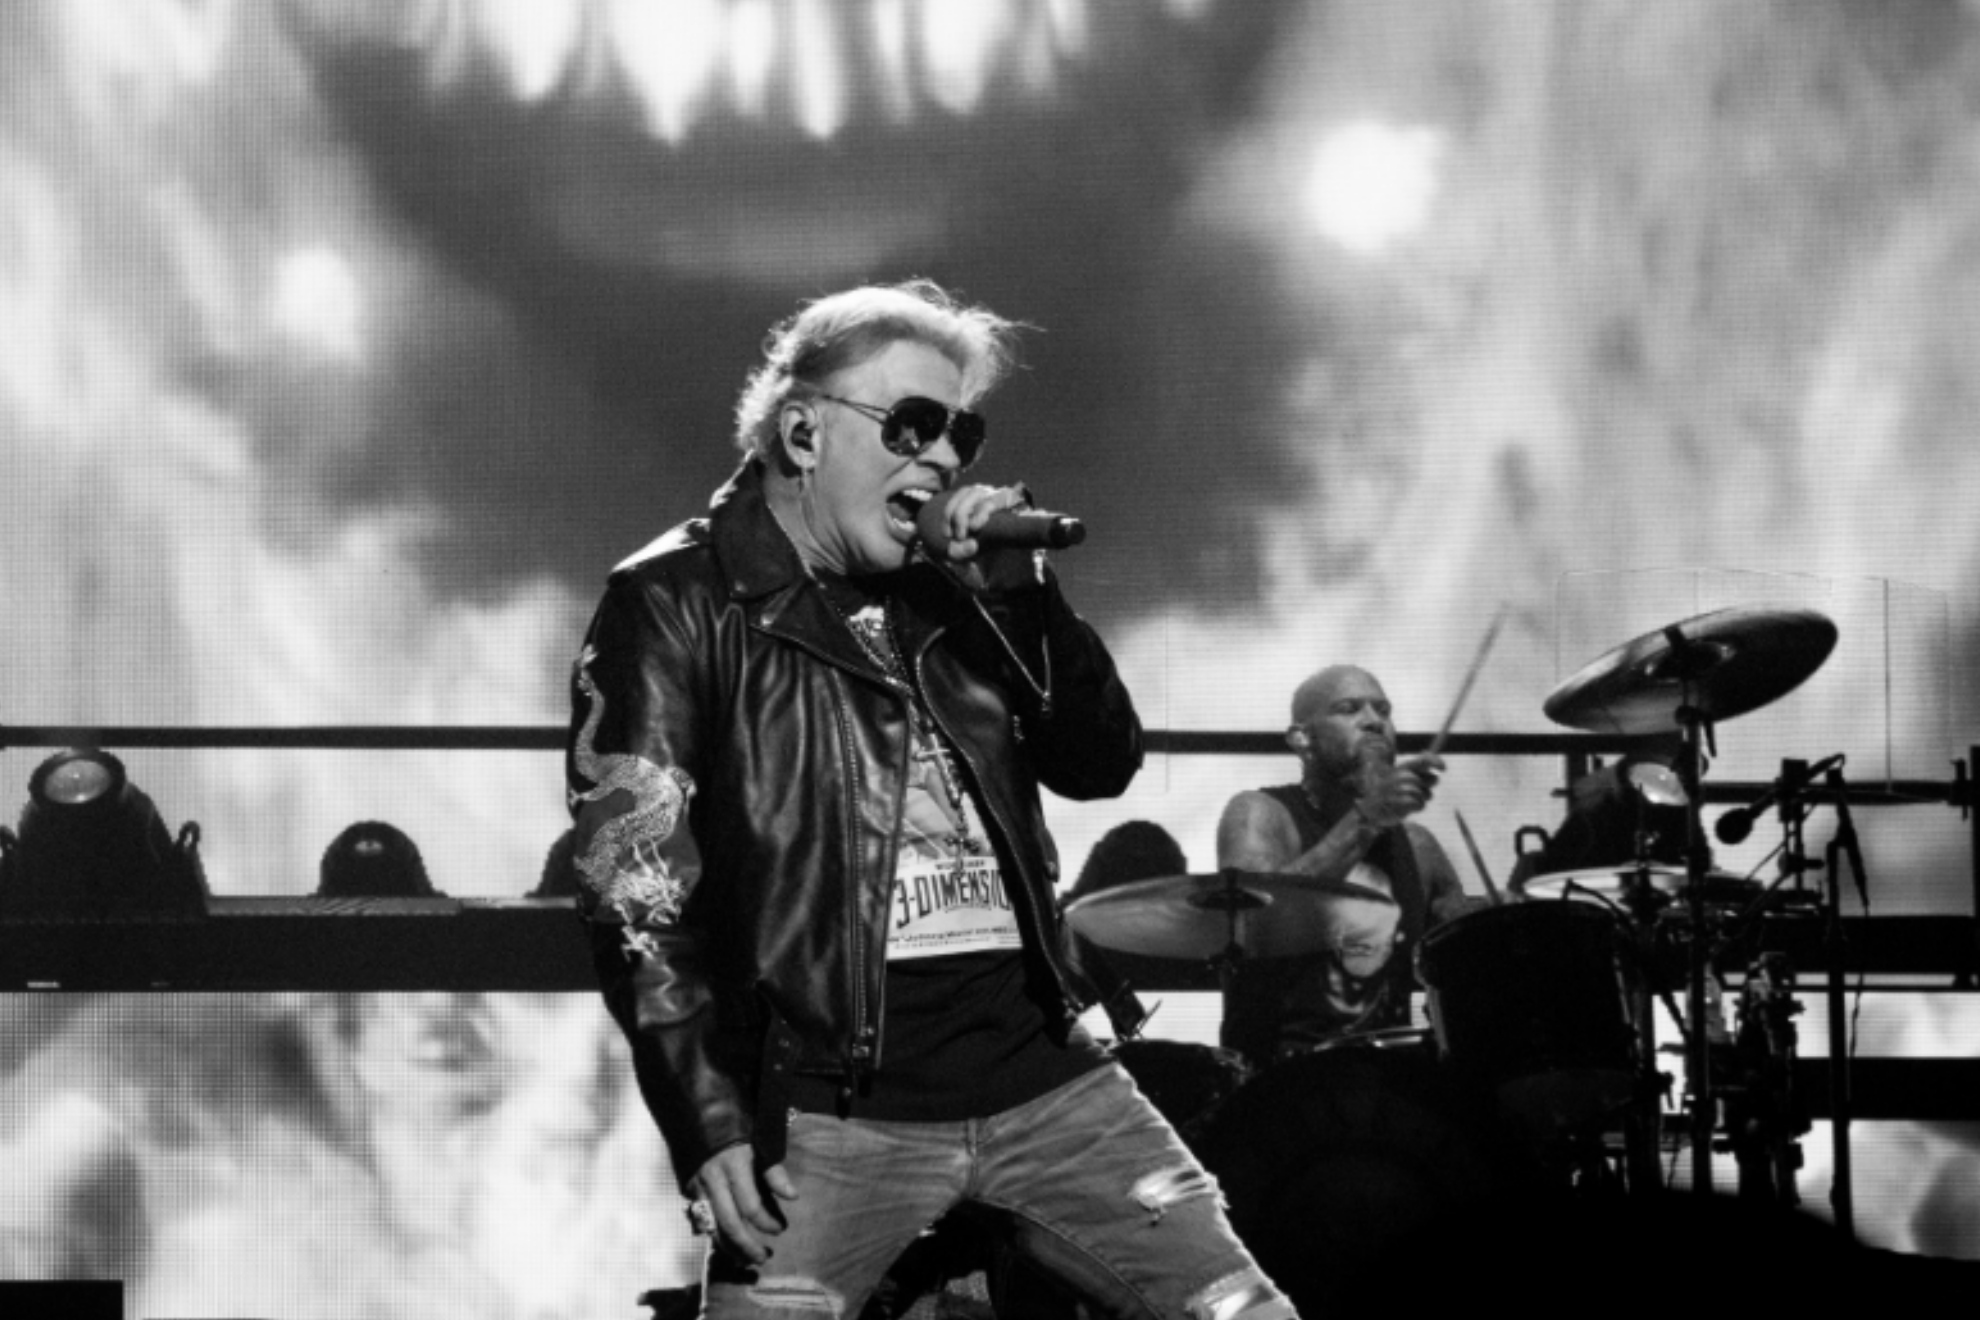 Guns N' Roses' Axl Rose throws a microphone during concert to hit a drone, leaves a woman in a bloody mess